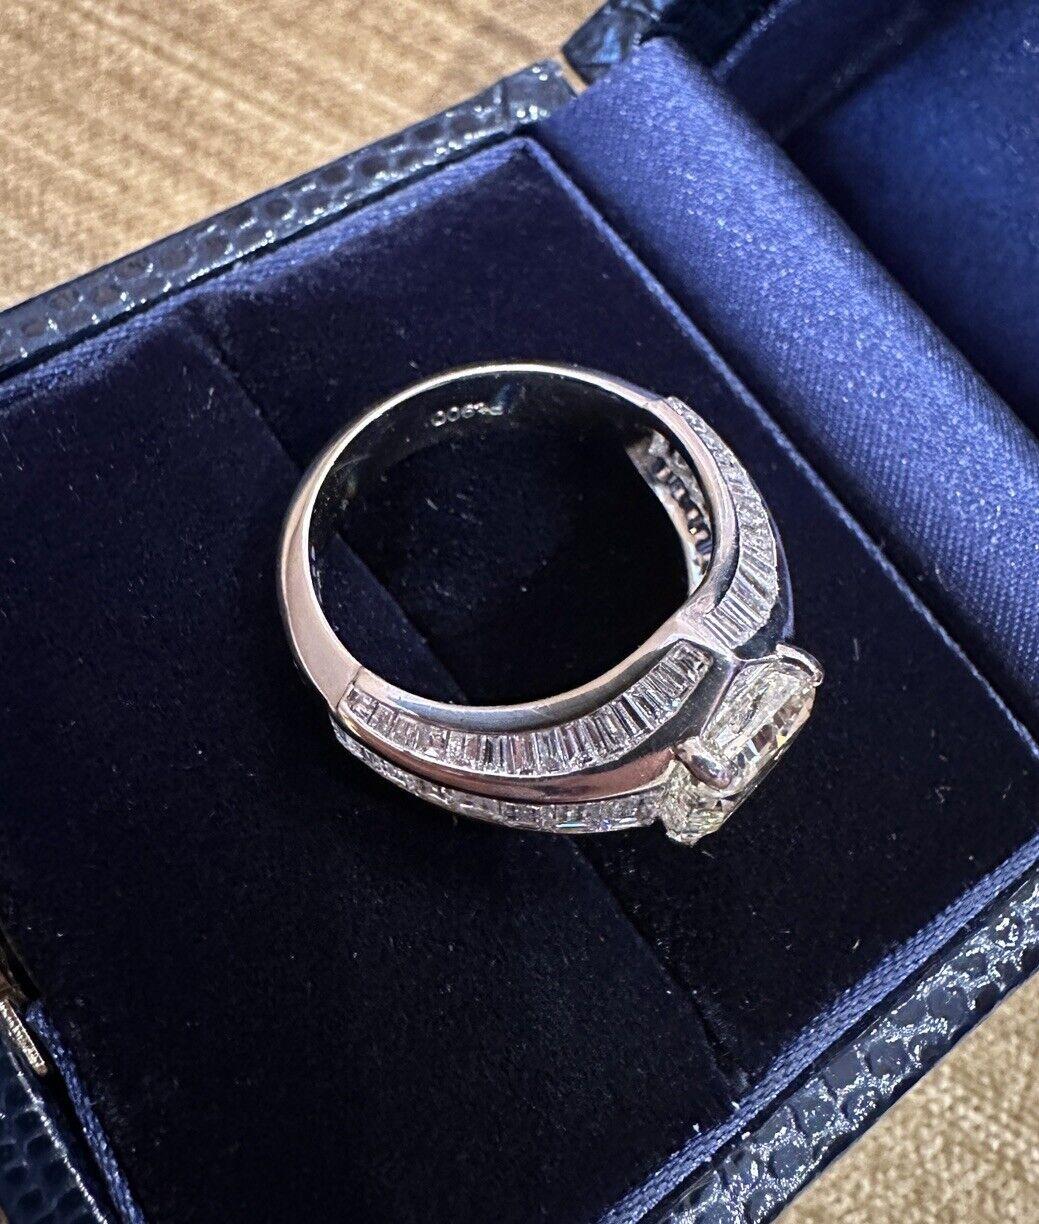 2.77 Carat Radiant Cut Diamond Ring with Baguette Band in Platinum In Excellent Condition For Sale In La Jolla, CA